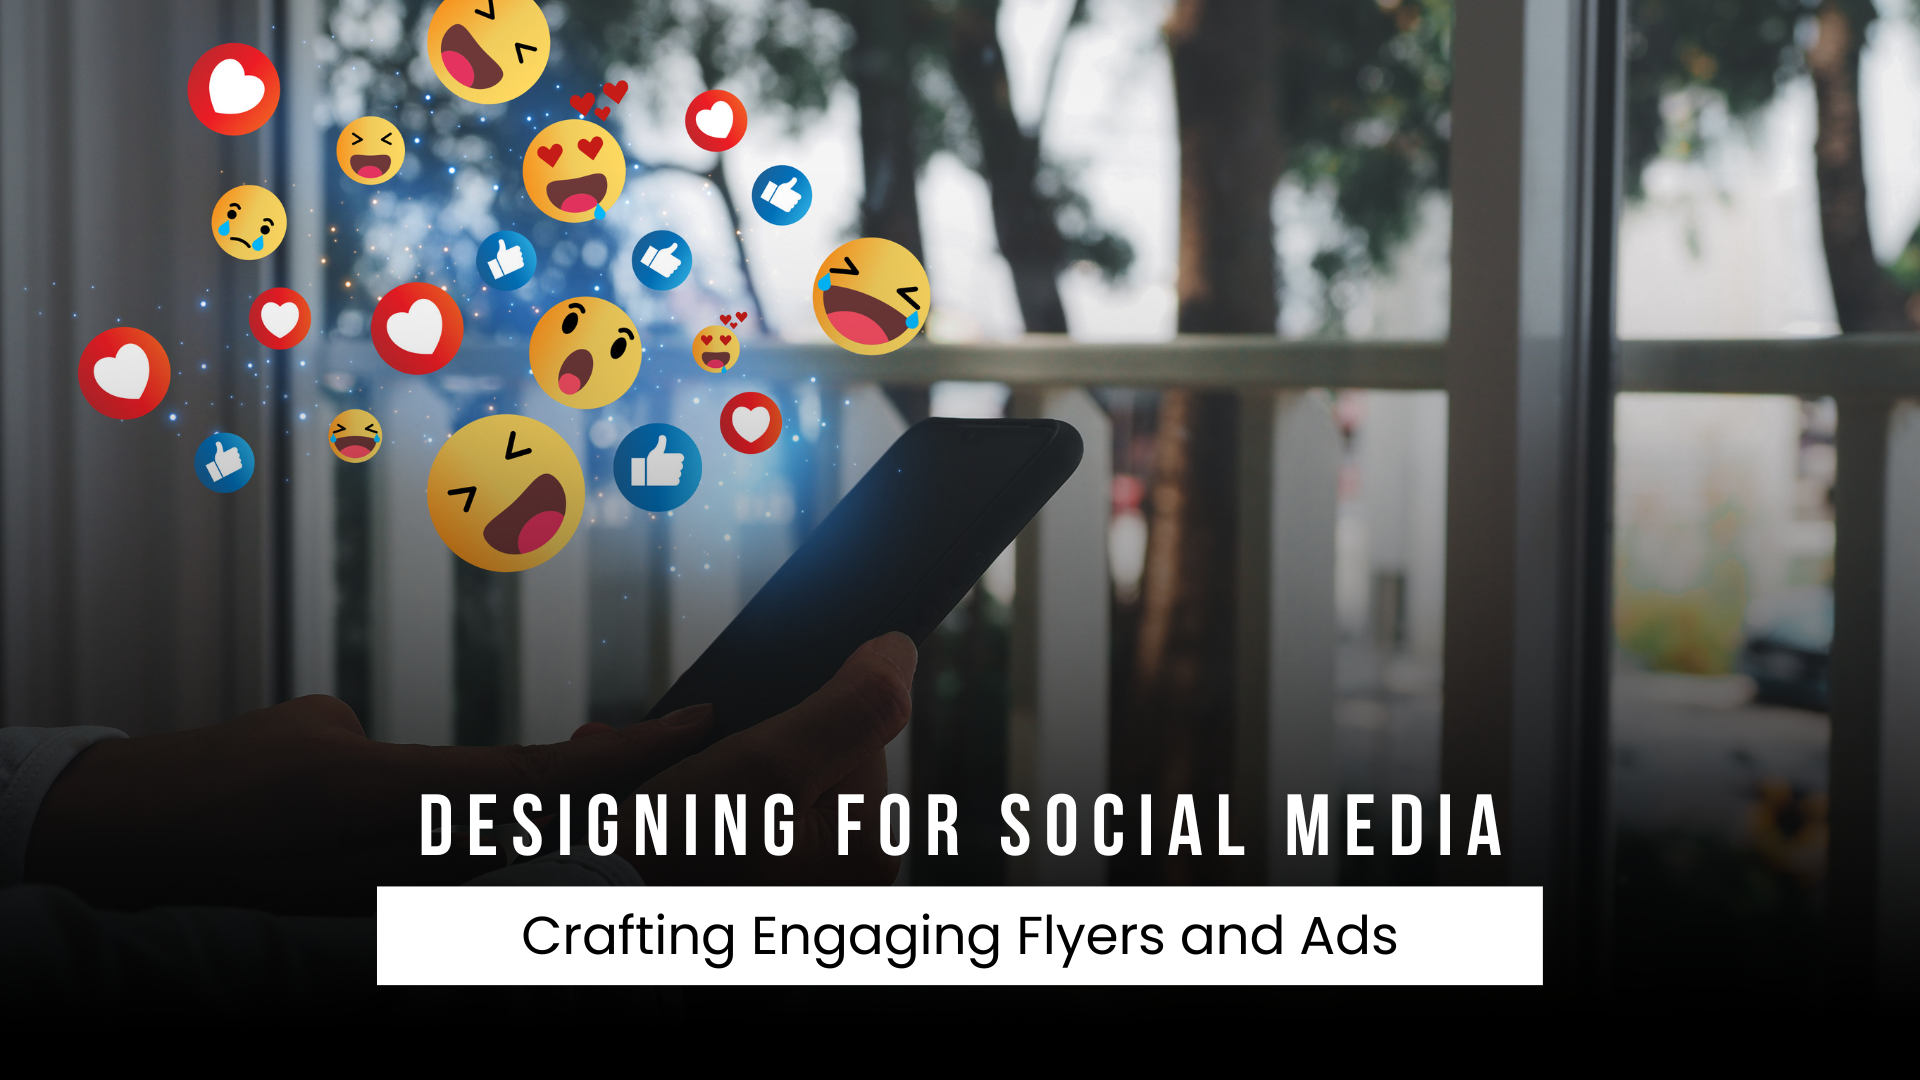 Designing for Social Media: Crafting Engaging Flyers and Ads